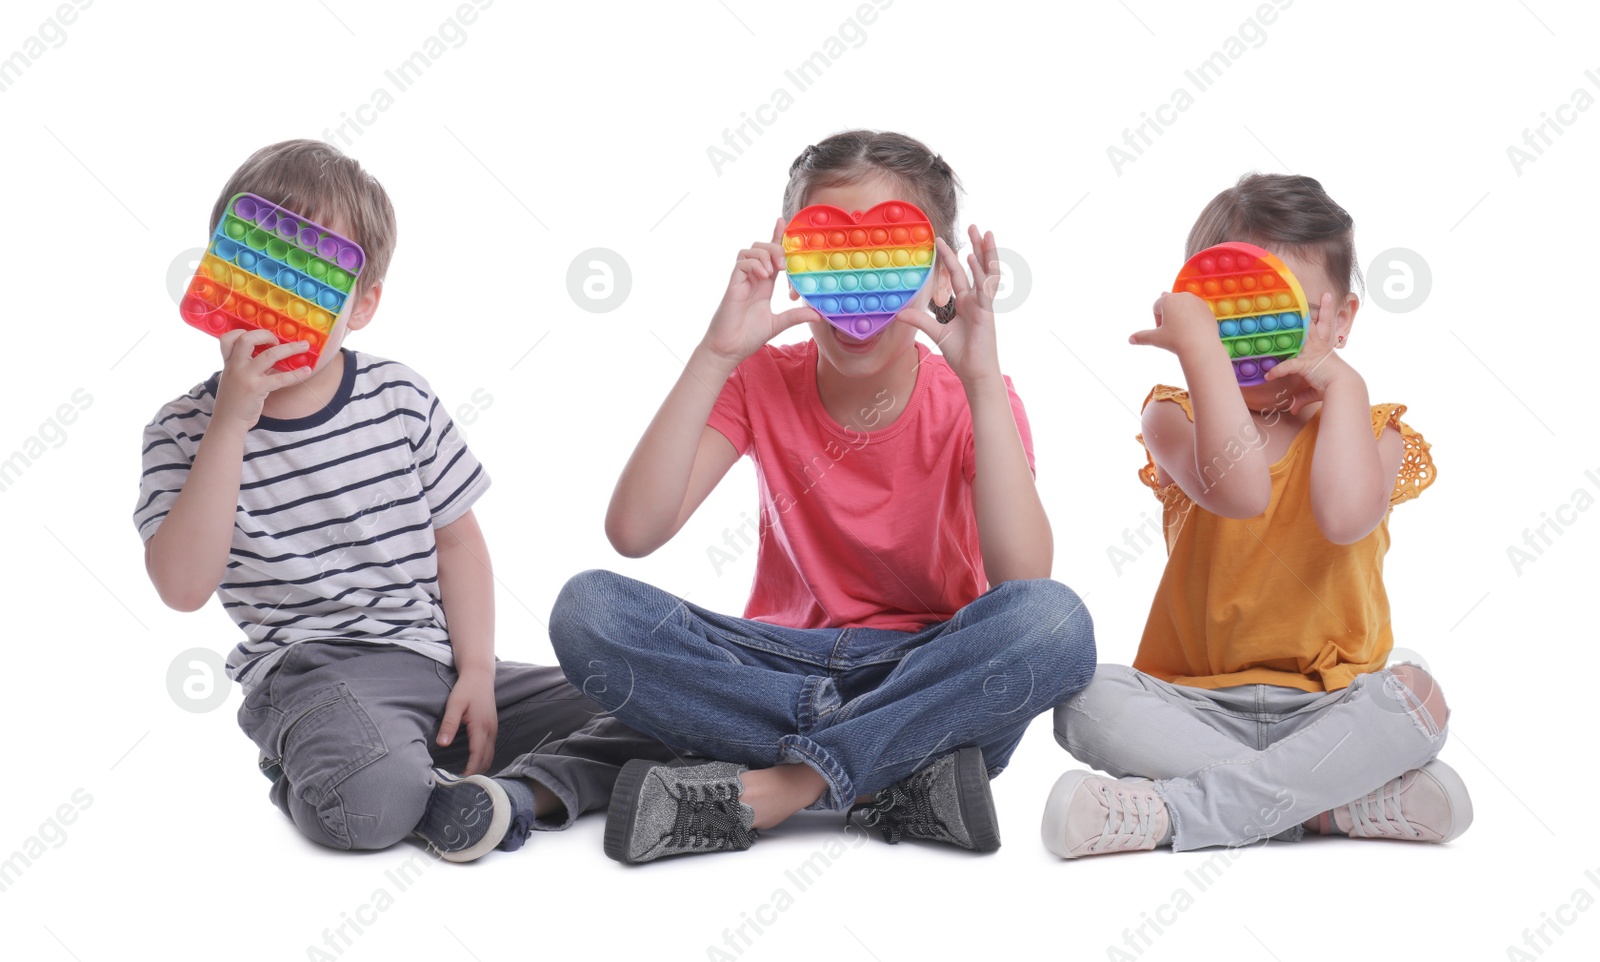 Photo of Little children with pop it fidget toys on white background